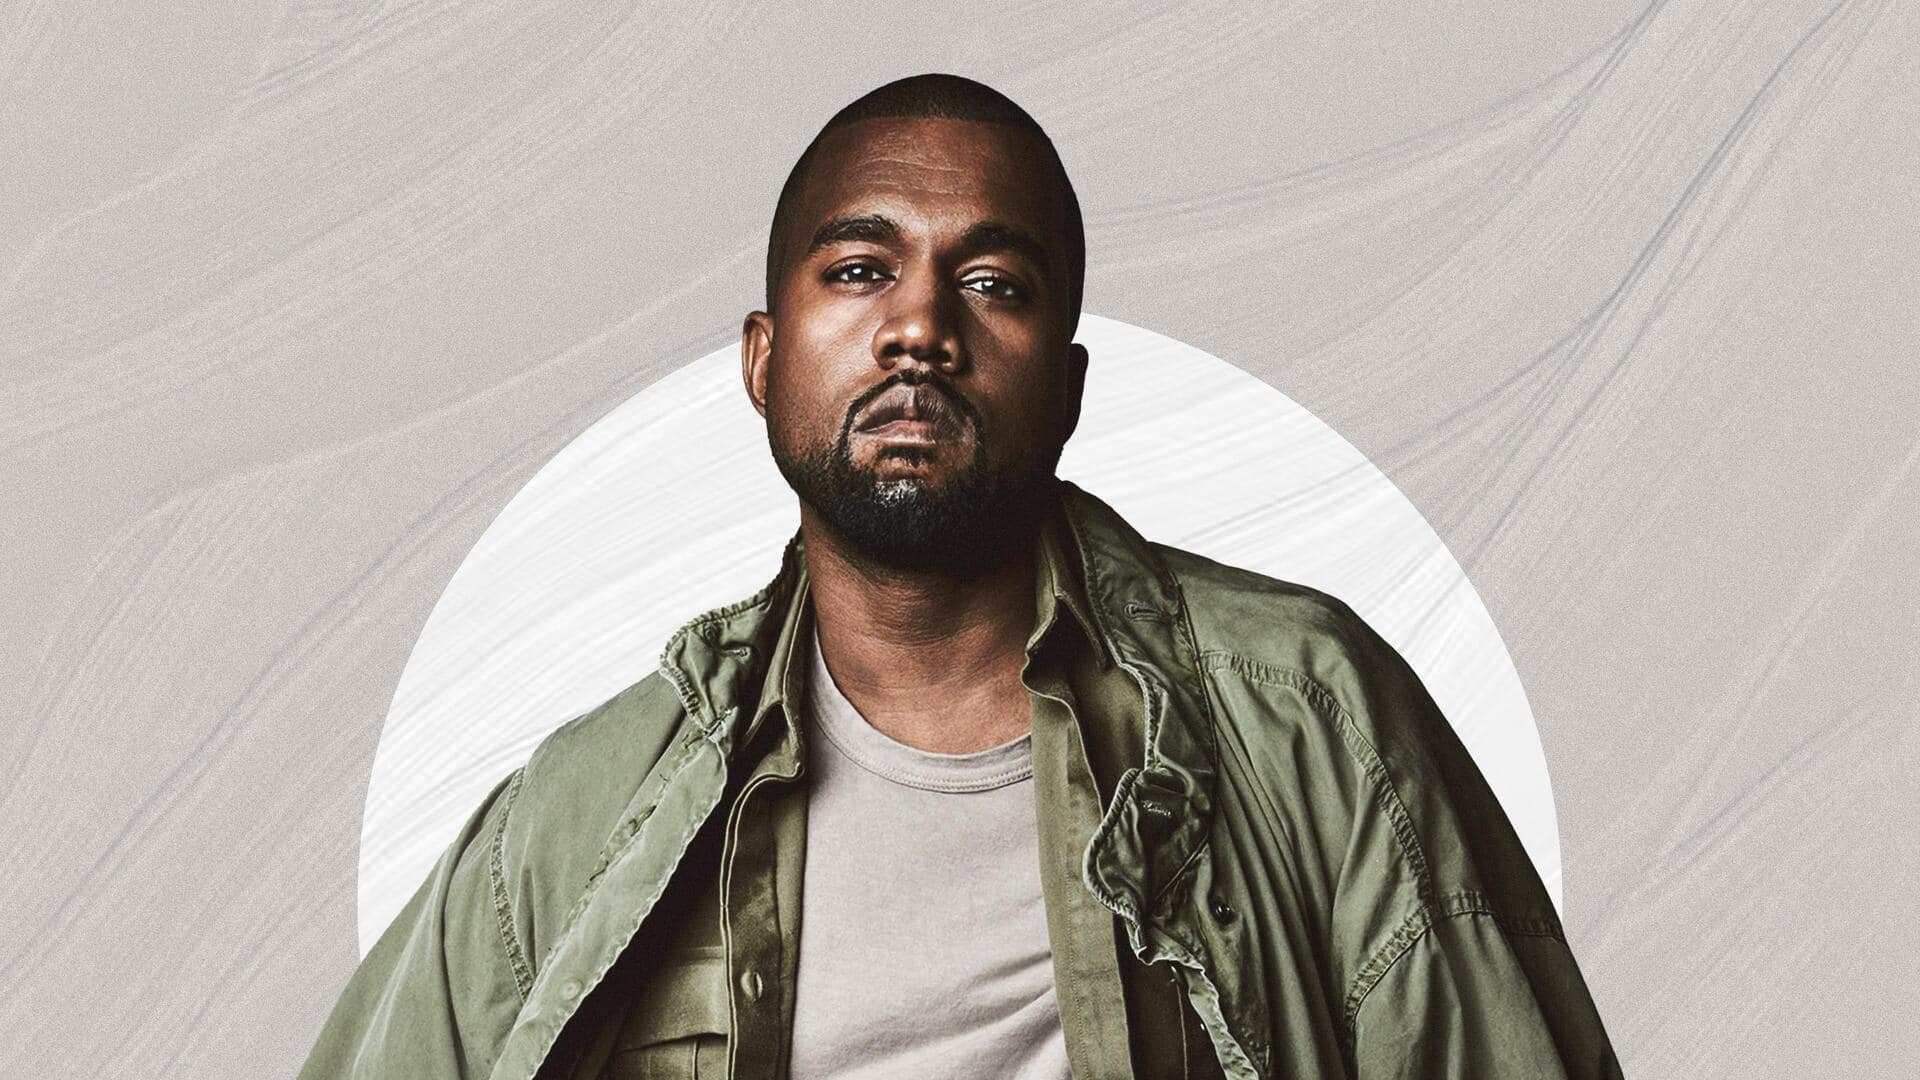 Following Ye's controversy, Adidas to sell remaining Yeezy sneakers 